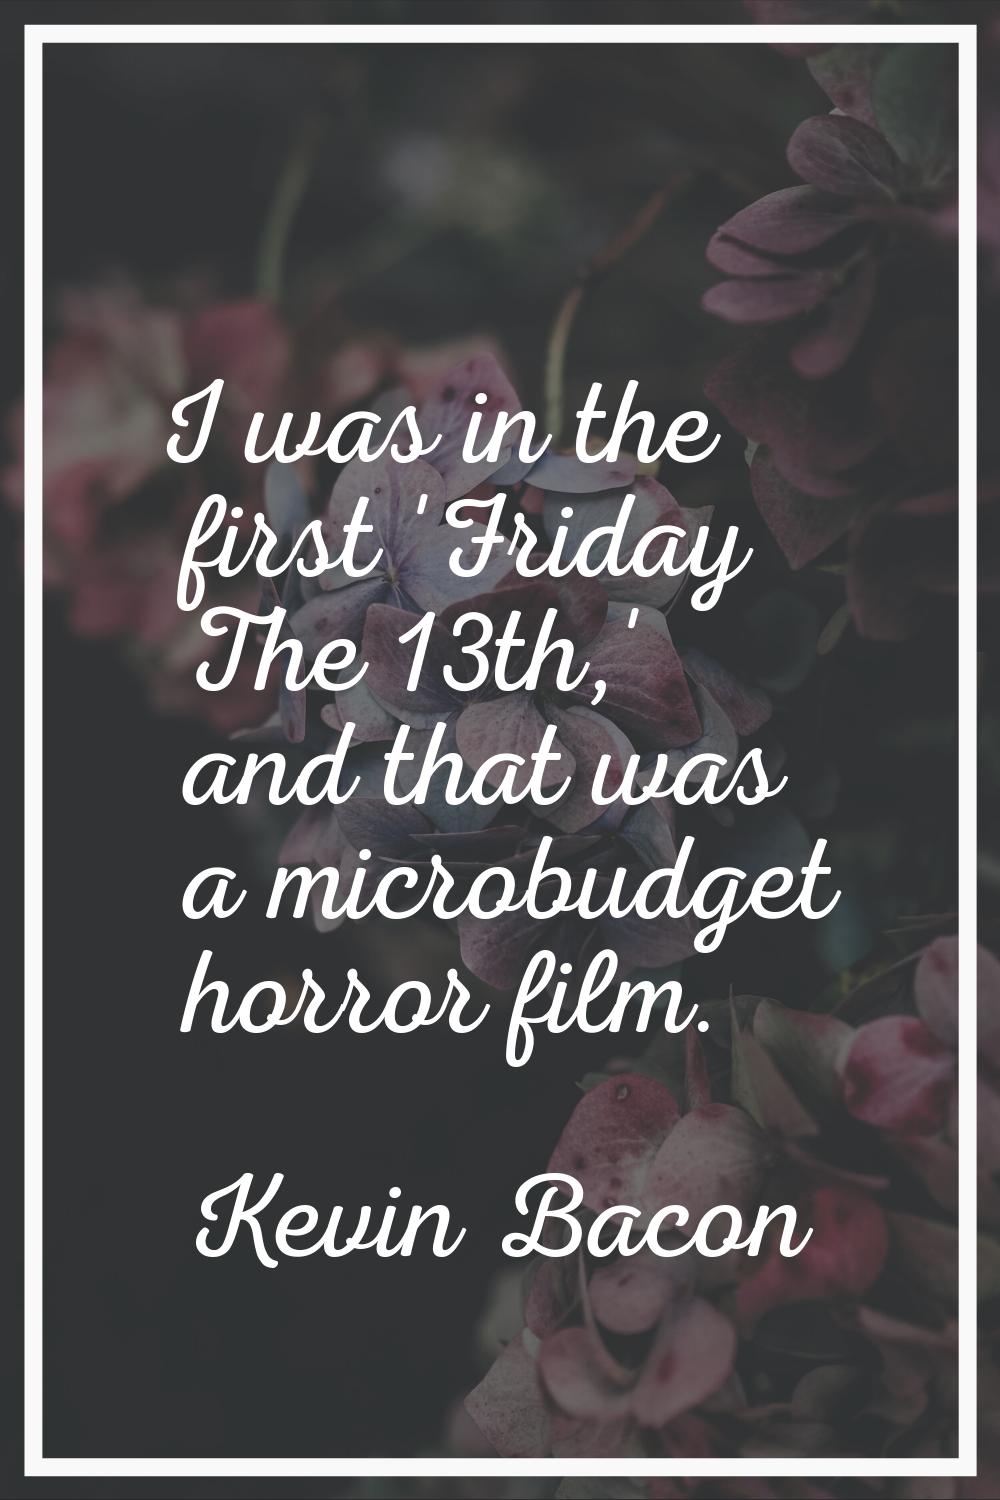 I was in the first 'Friday The 13th,' and that was a microbudget horror film.